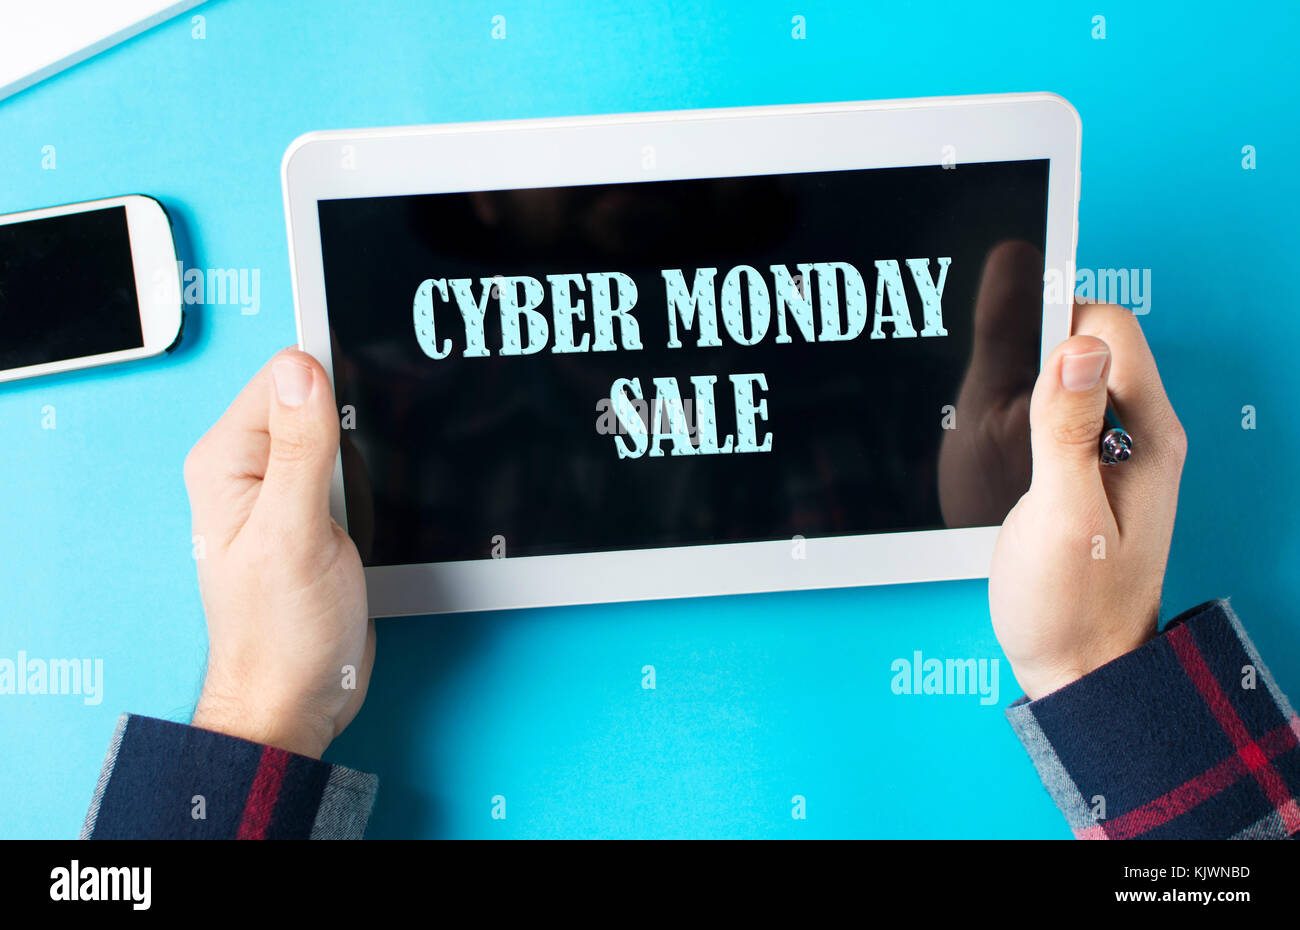 Cyber Monday sale sign on a tablet device point of view Stock Photo